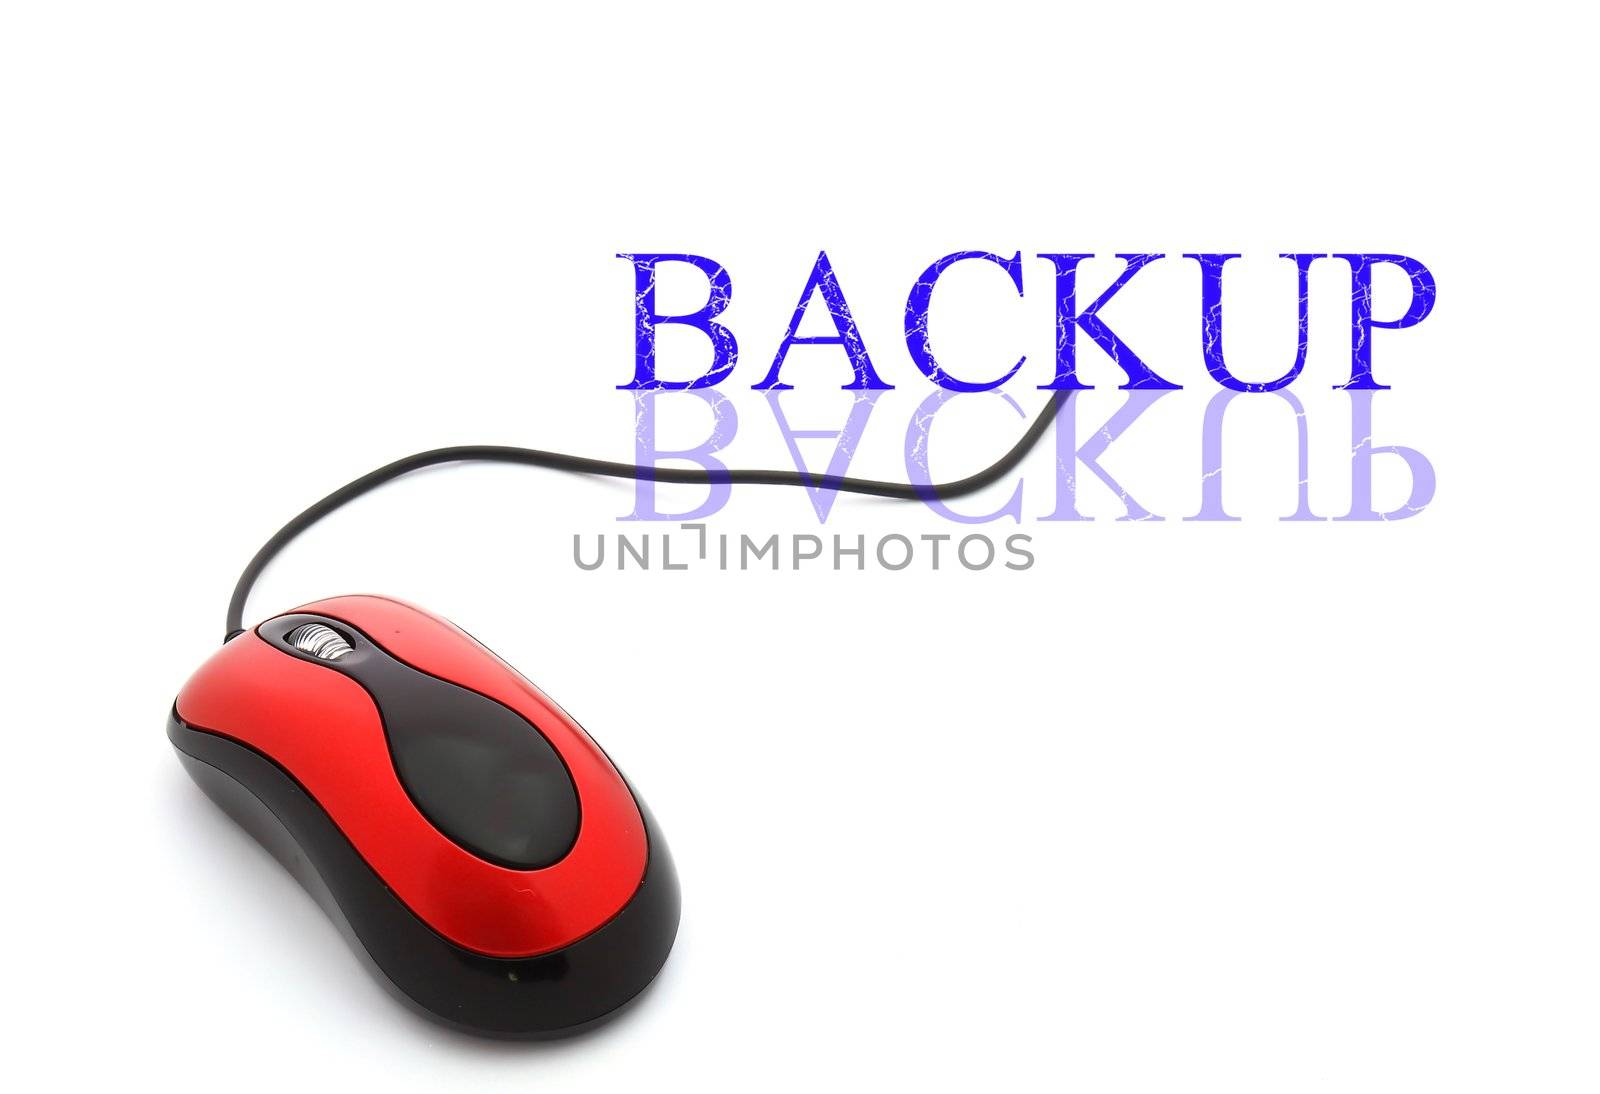 Backup word connected with pc mouse by rufous